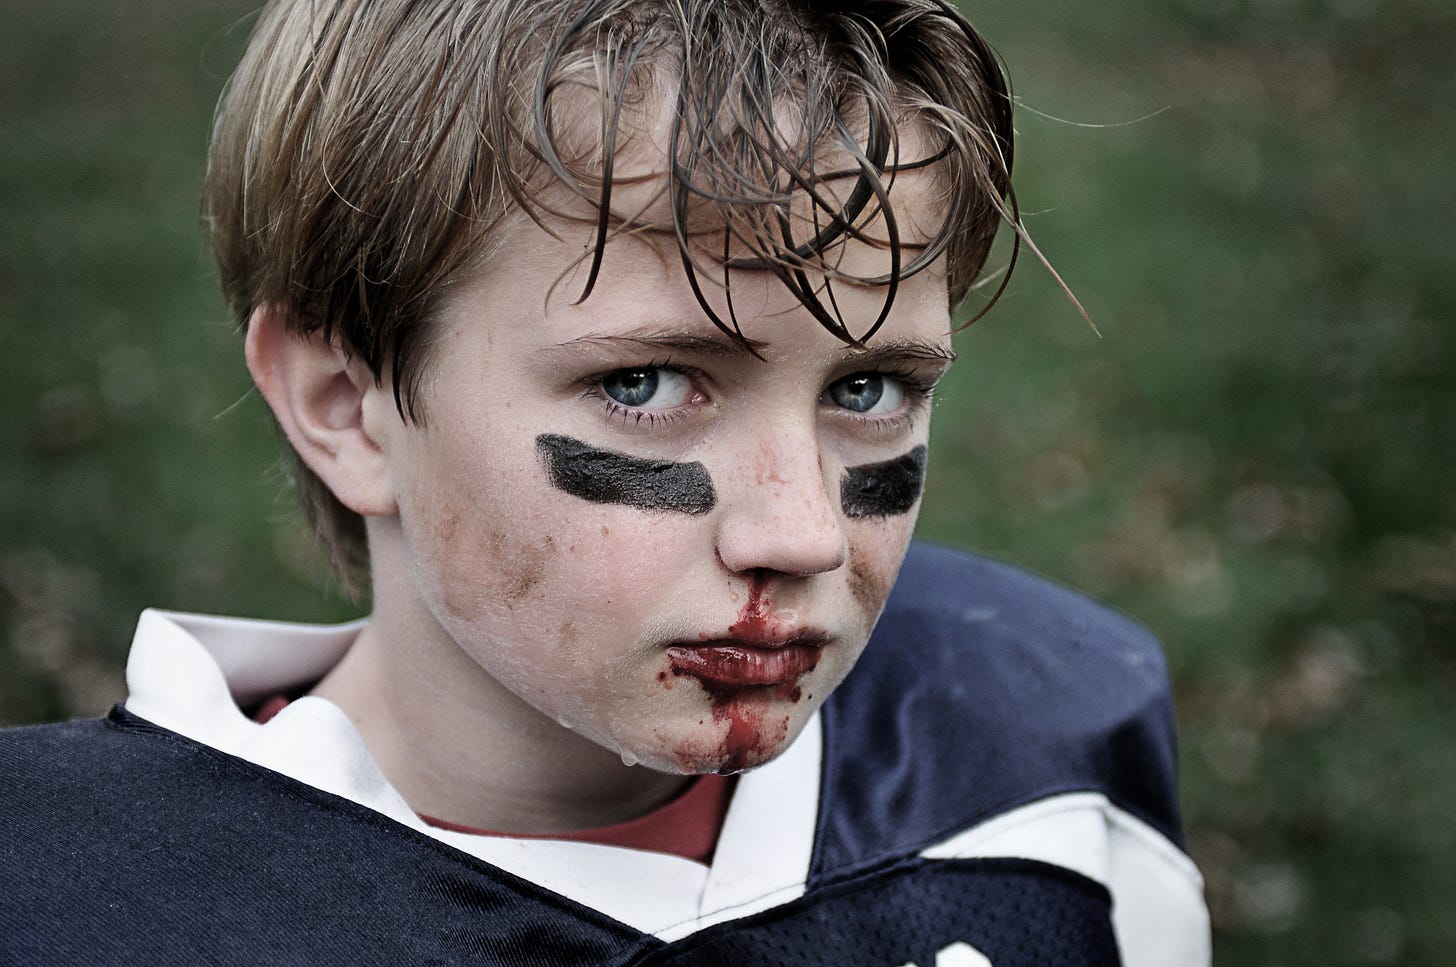 Young football player in pads with eye black and a bloody mouth